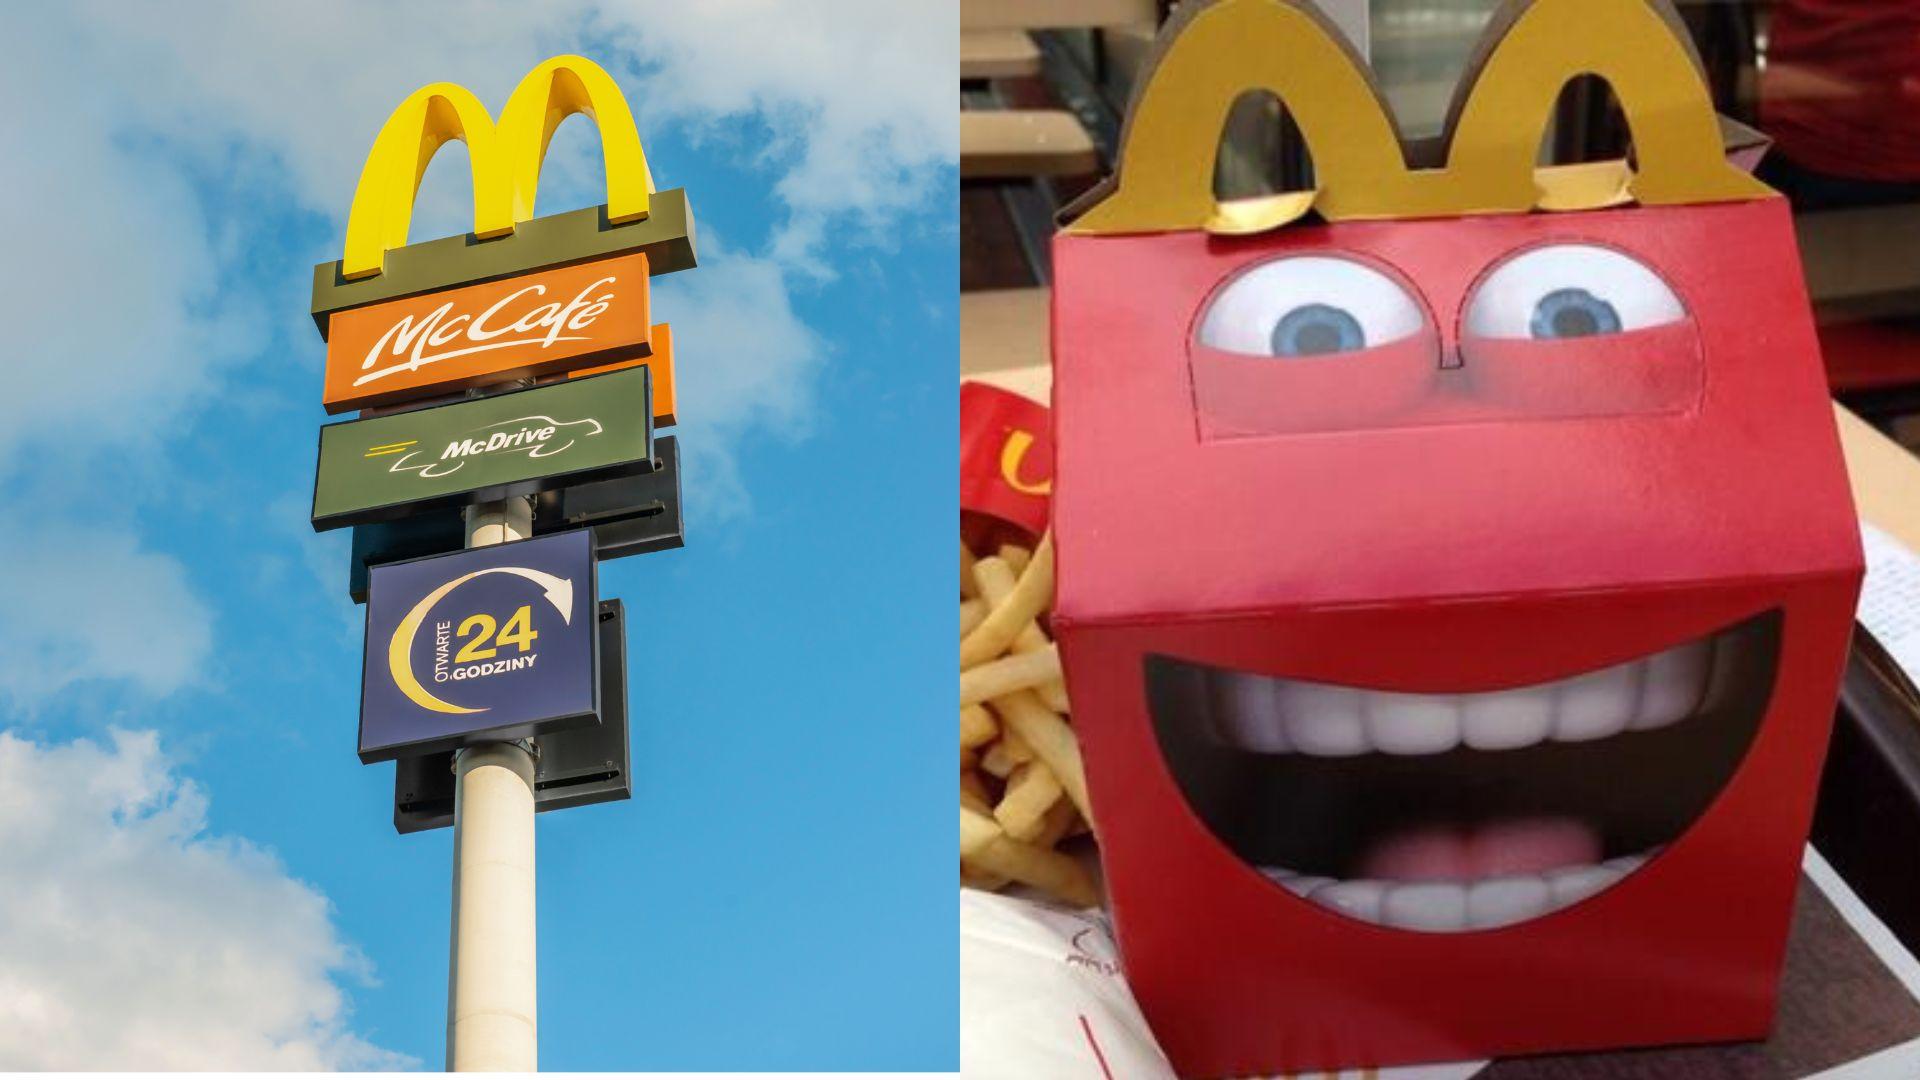 McDonald's happy meal and sign